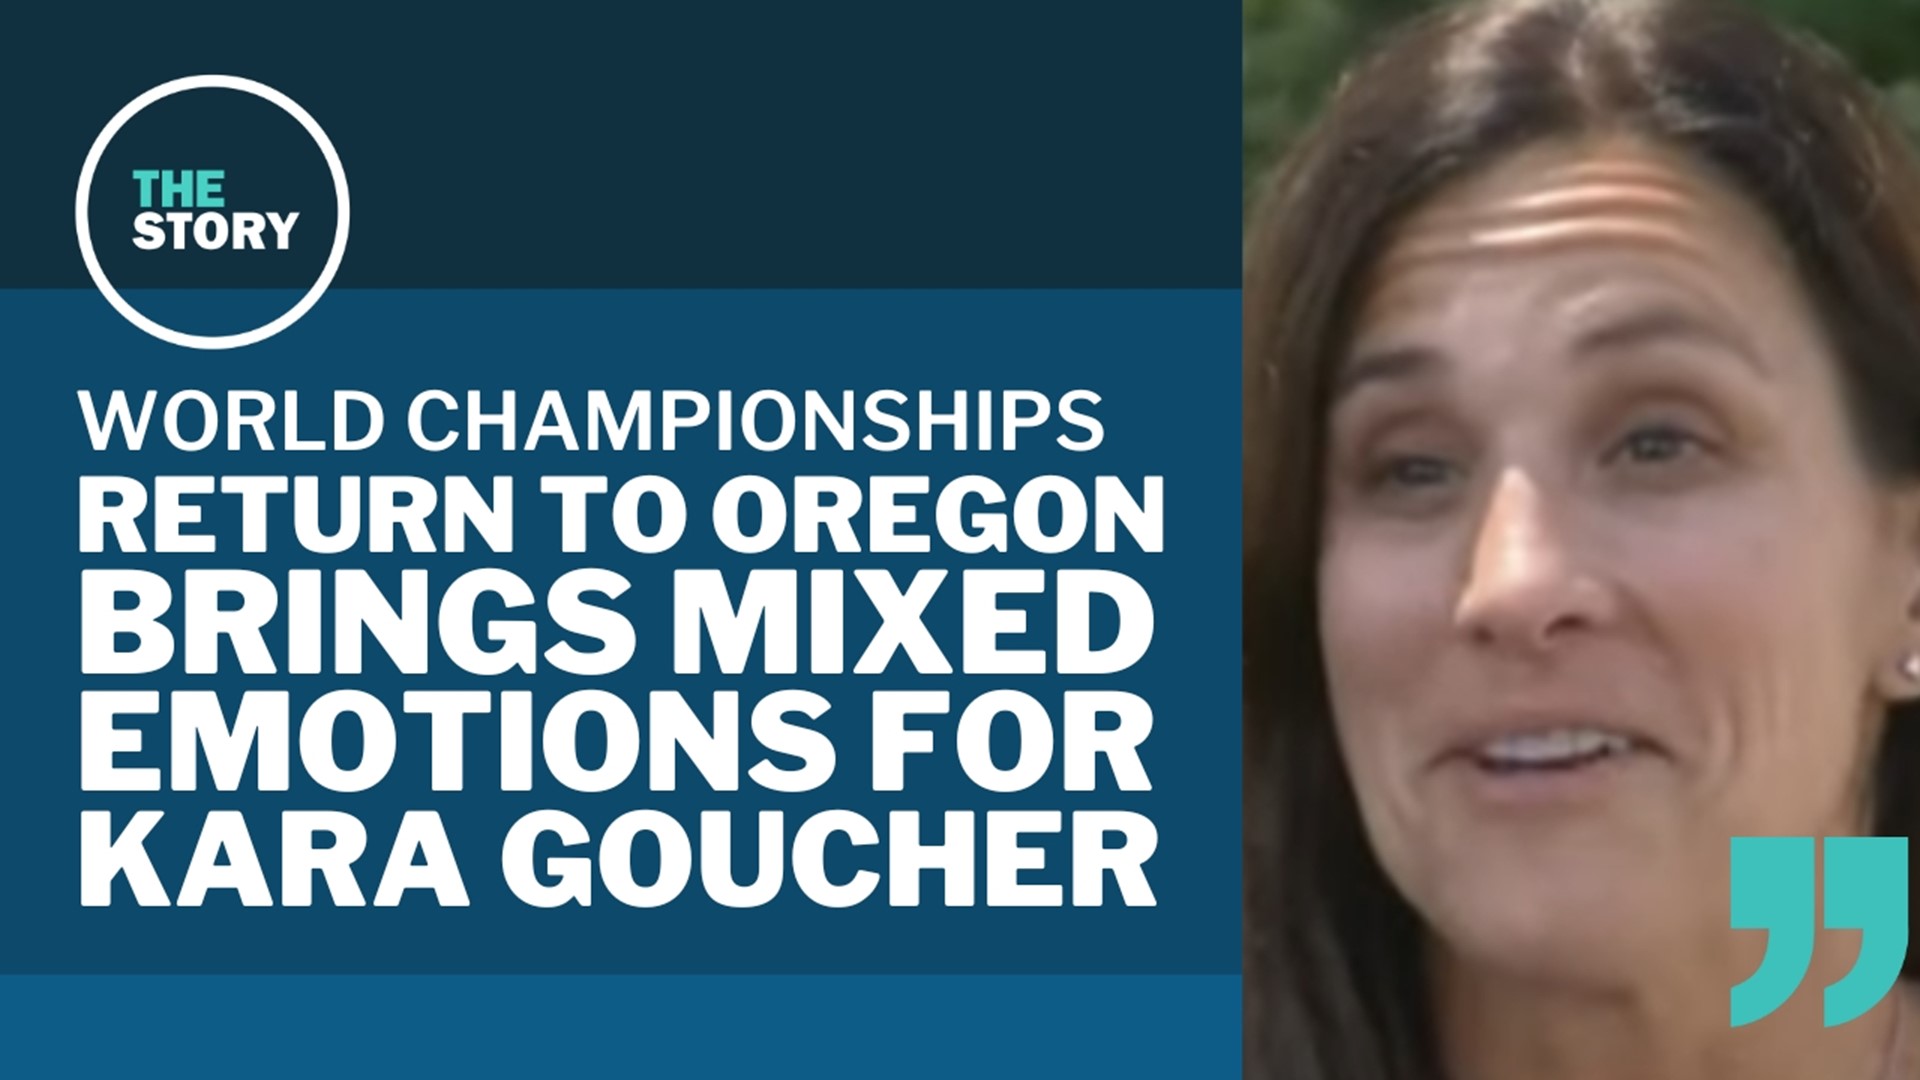 Kara Goucher was one of Oregon's top runners before a series of challenges flipped her life upside down.